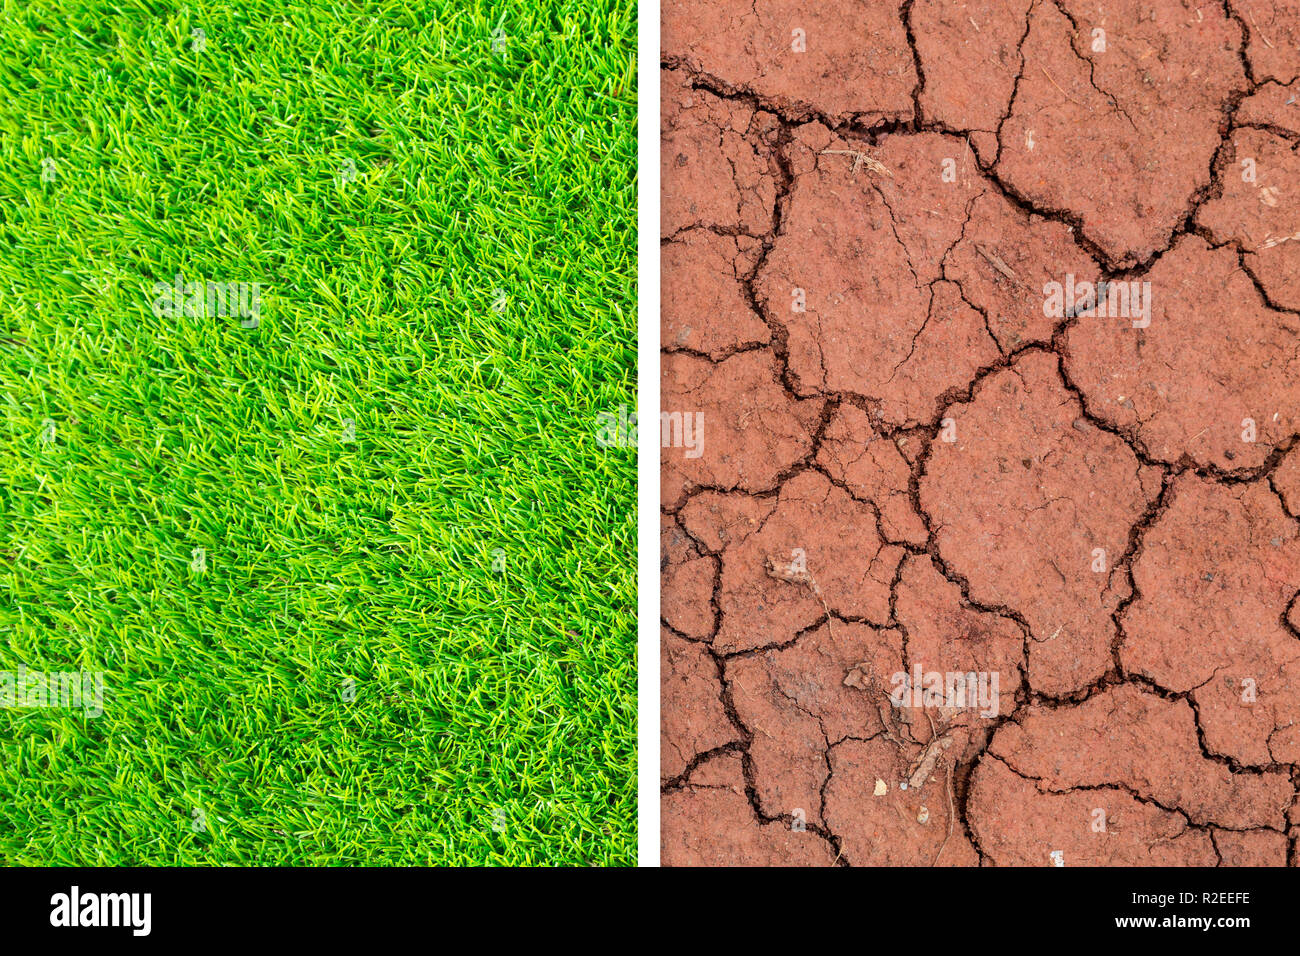 Green grass change to dry crack soil background texture. Element of design. Stock Photo